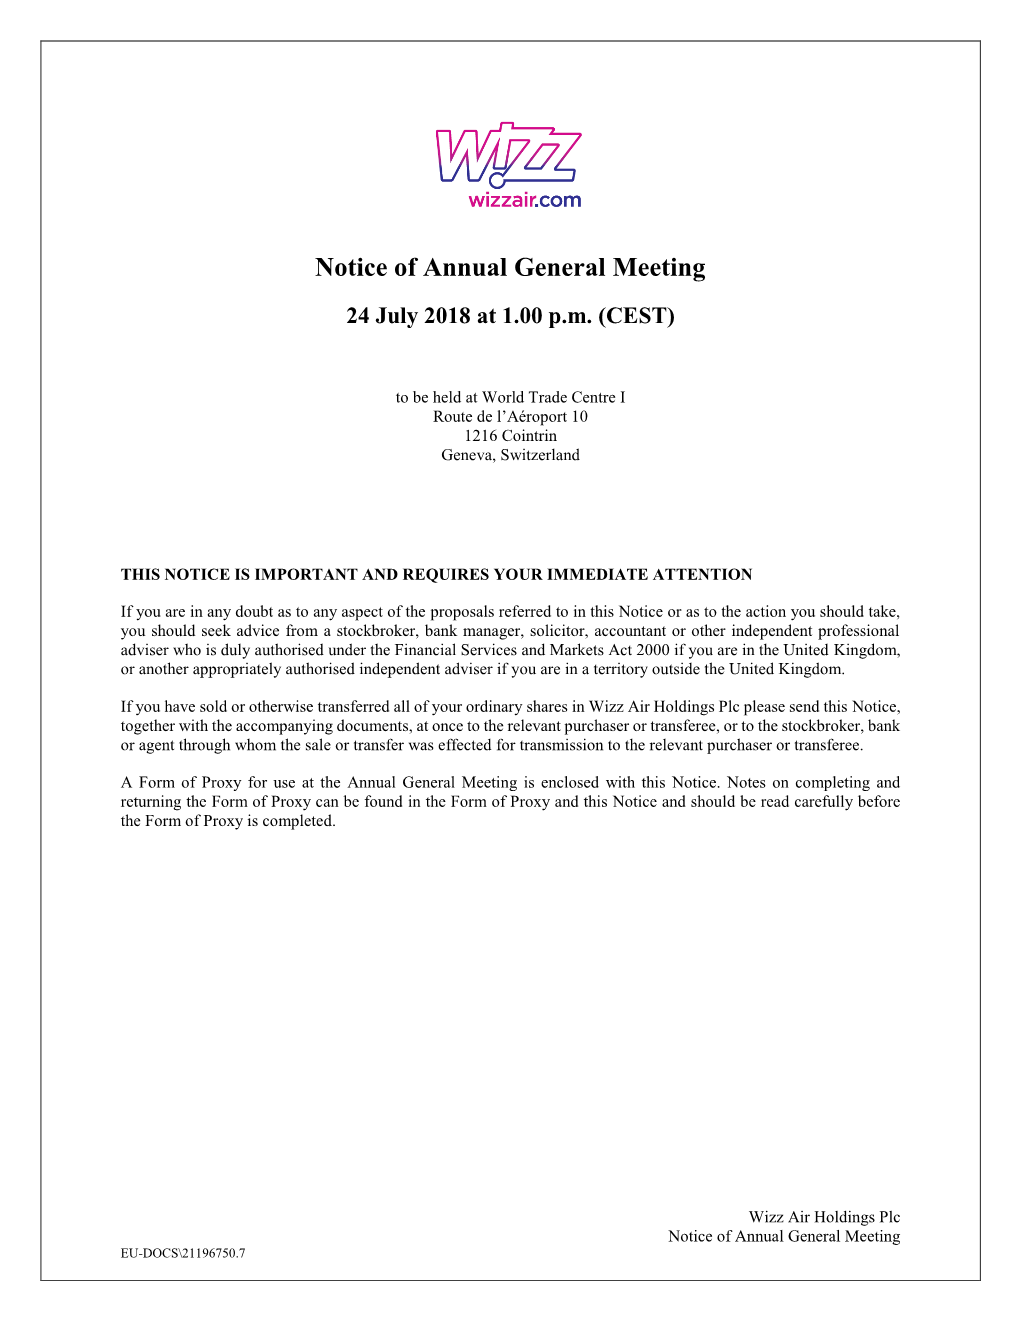 Notice of Annual General Meeting 24 July 2018 at 1.00 P.M